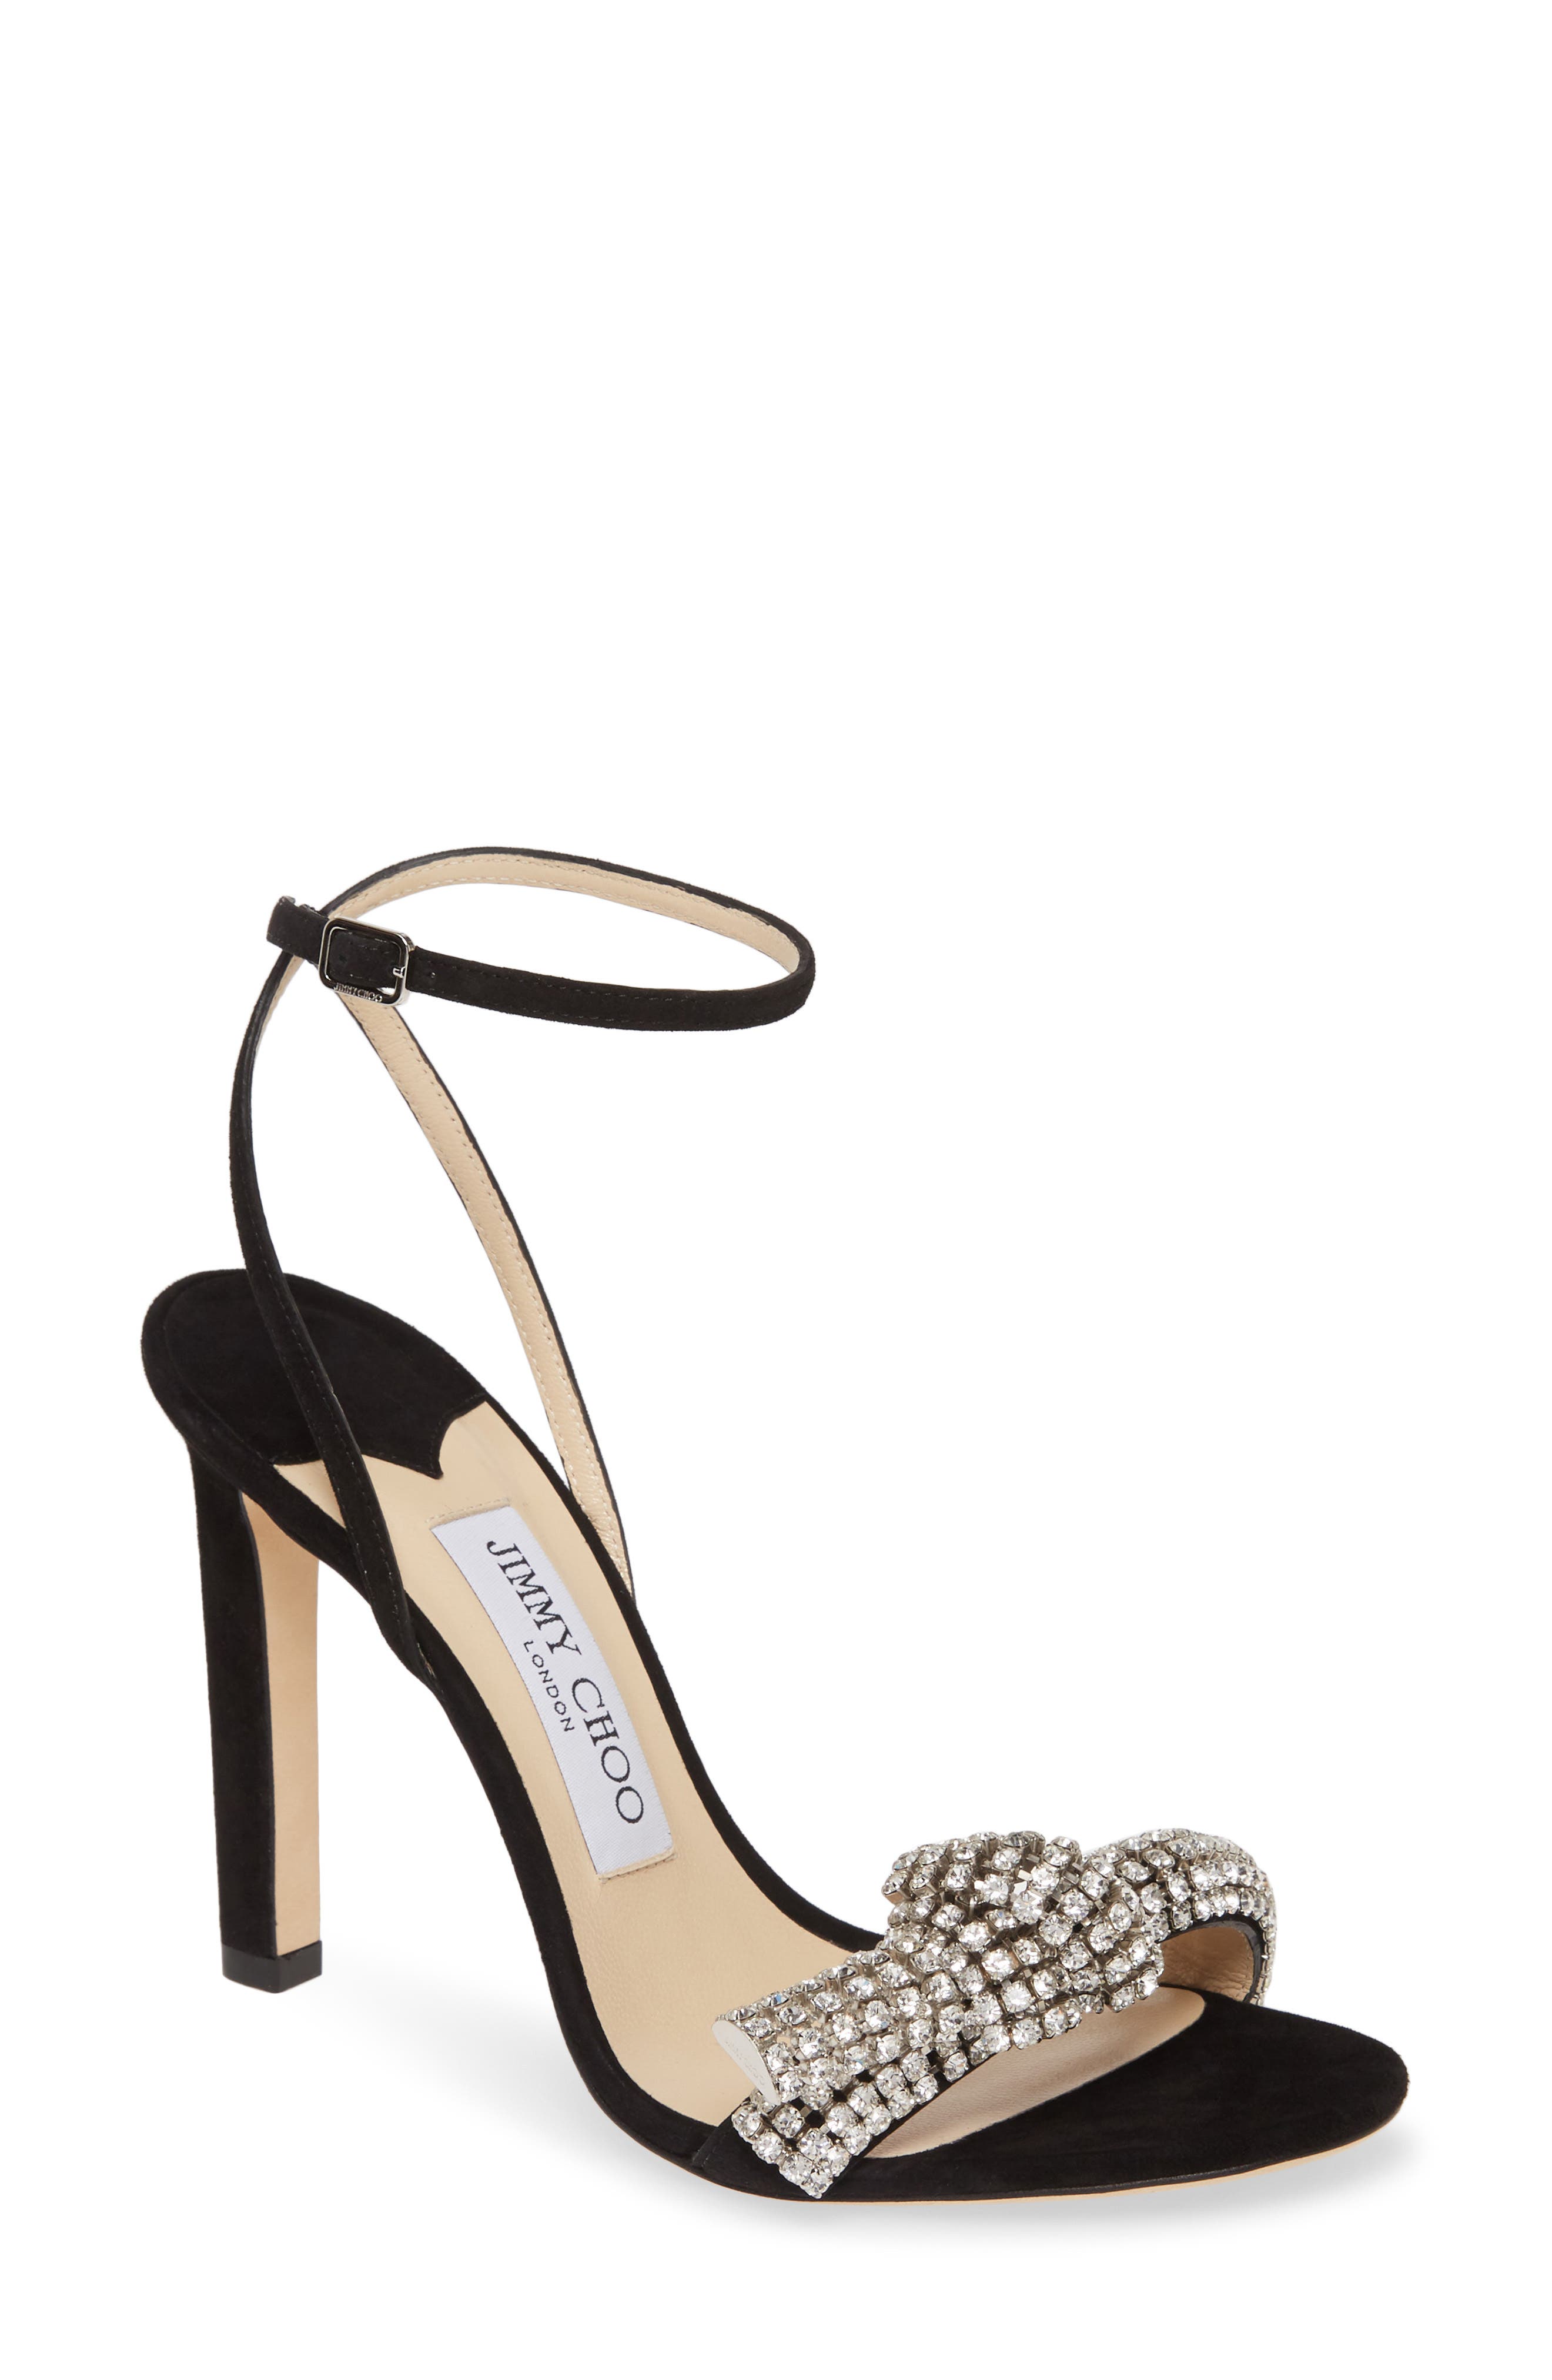 jimmy choo sandals with price